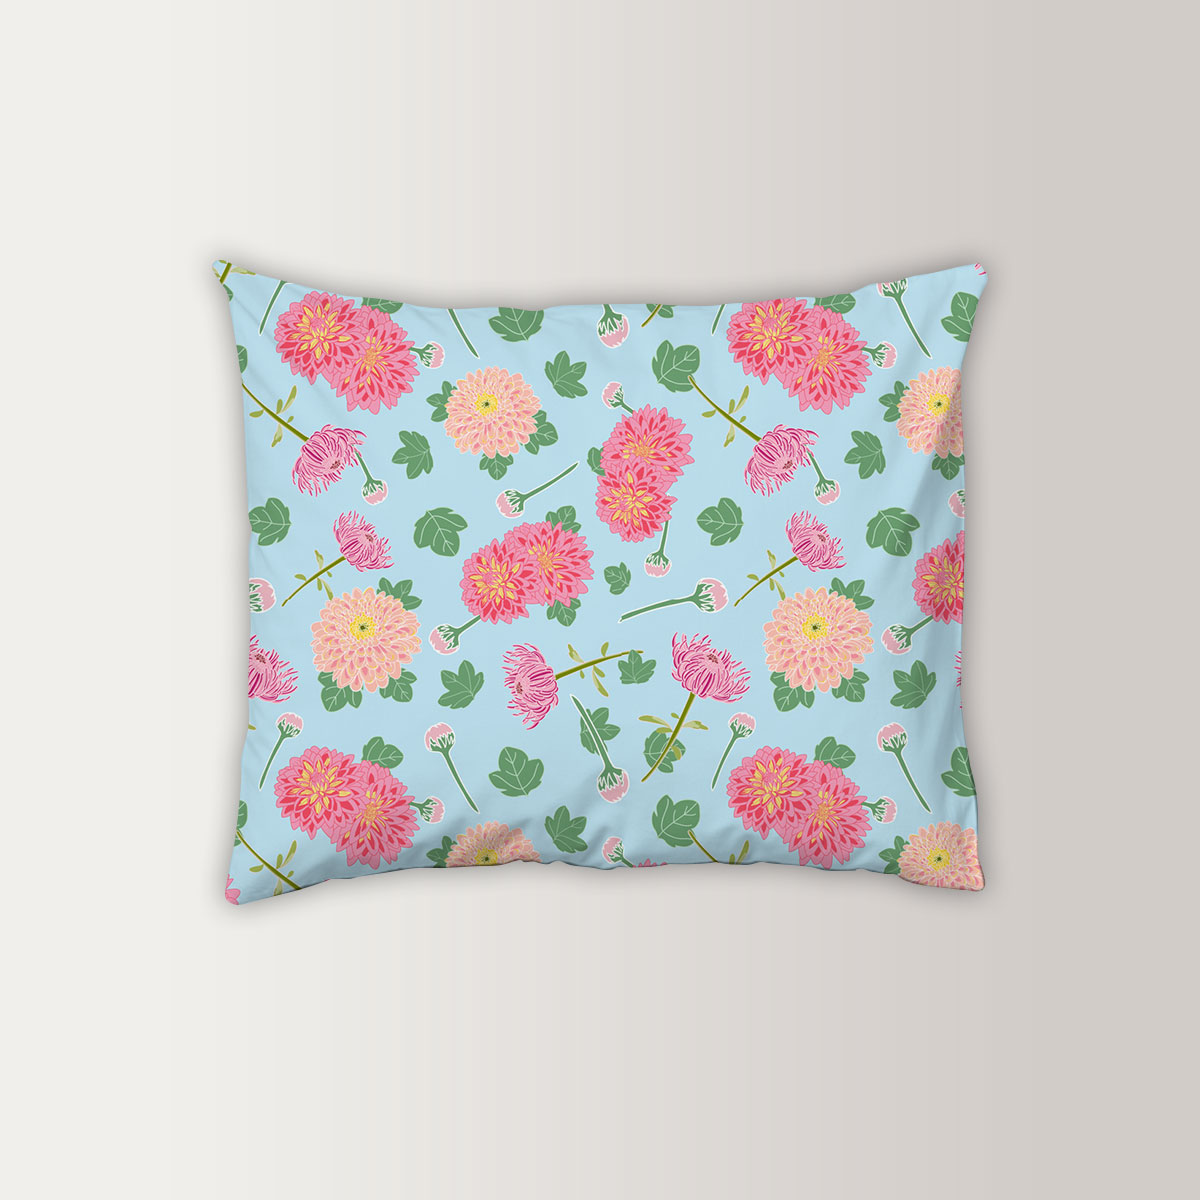 Pink Chrysanthemum Flowers And Leaves Pillow Case